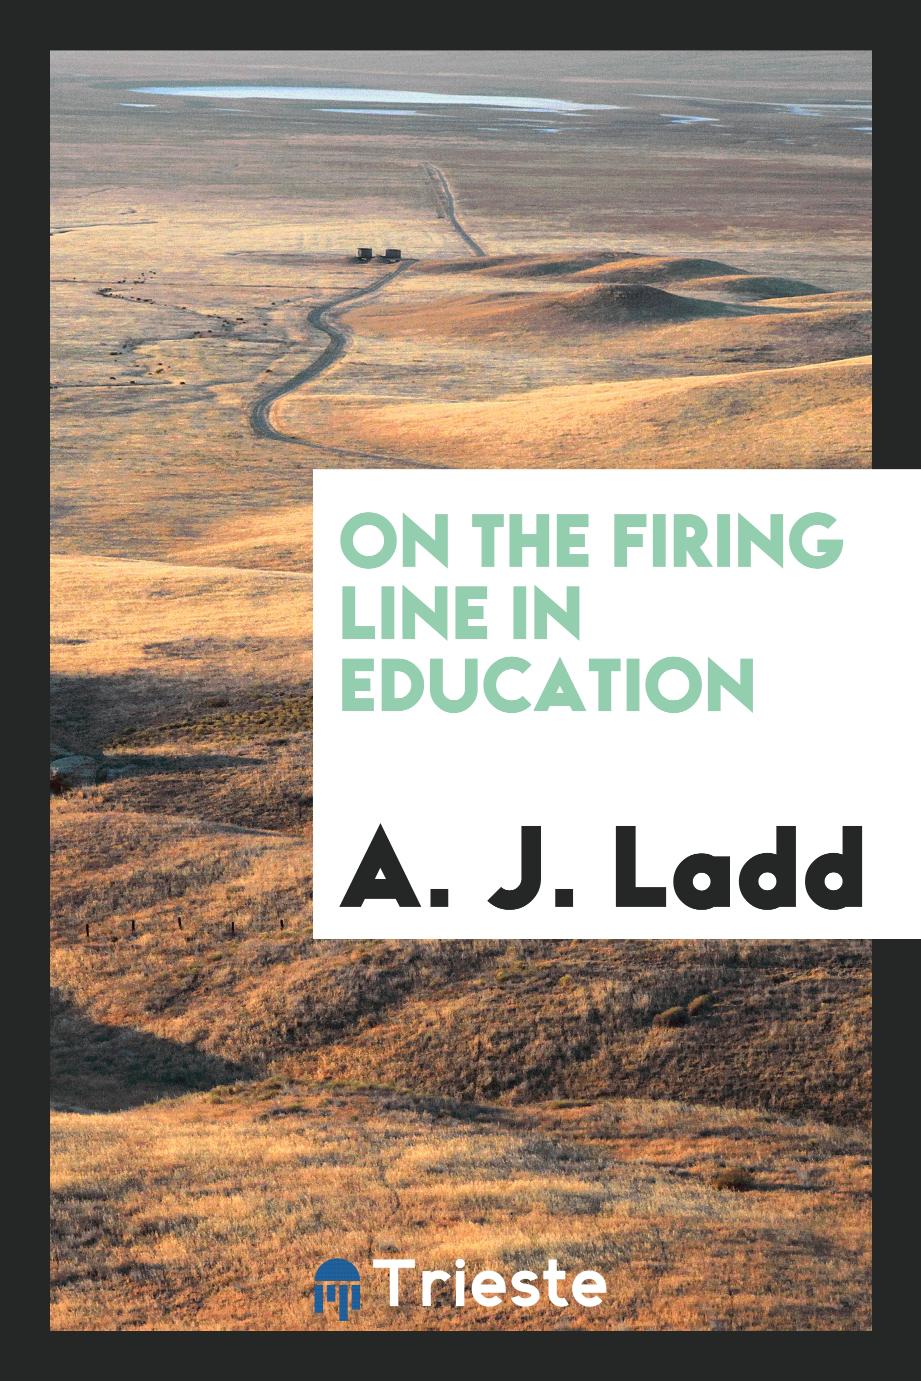 On the firing line in education